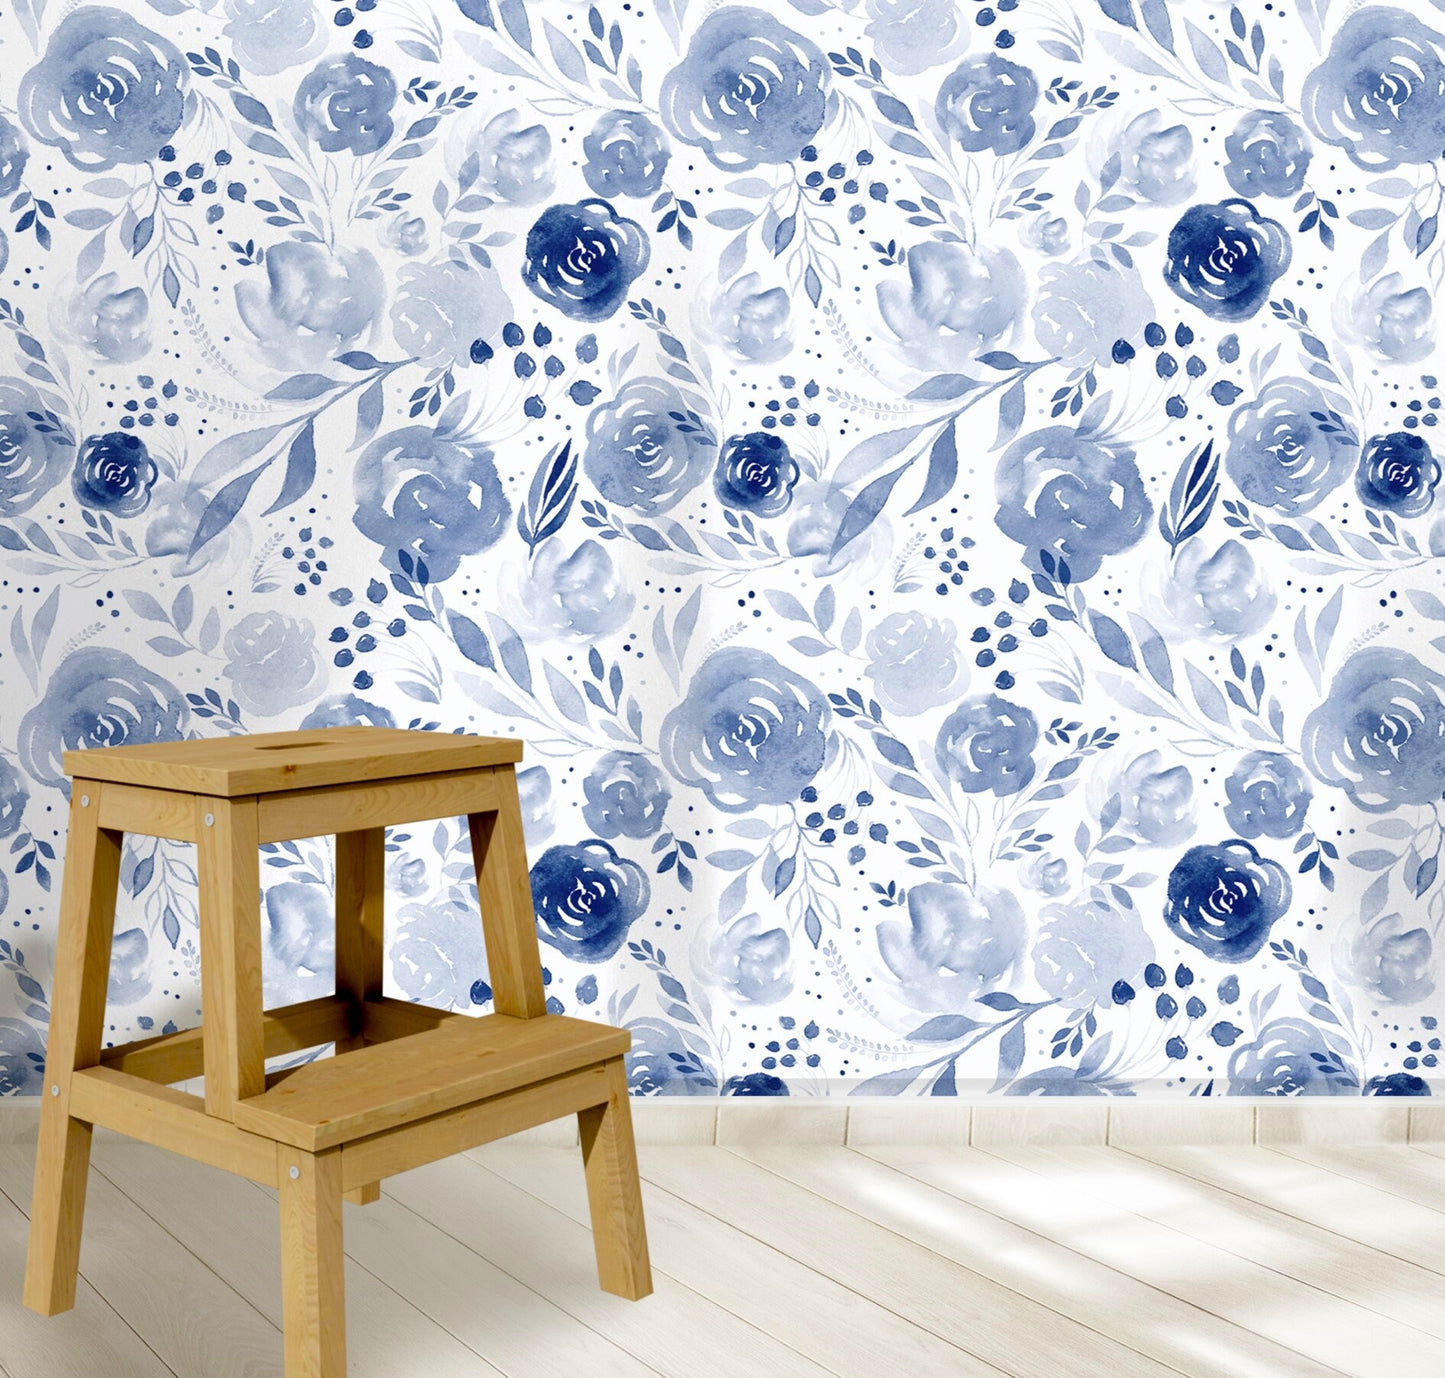 Blue Floral Wallpaper Peel and Stick Nursery Wallpaper, Watercolor Floral Wallpaper, Removable Wall Paper